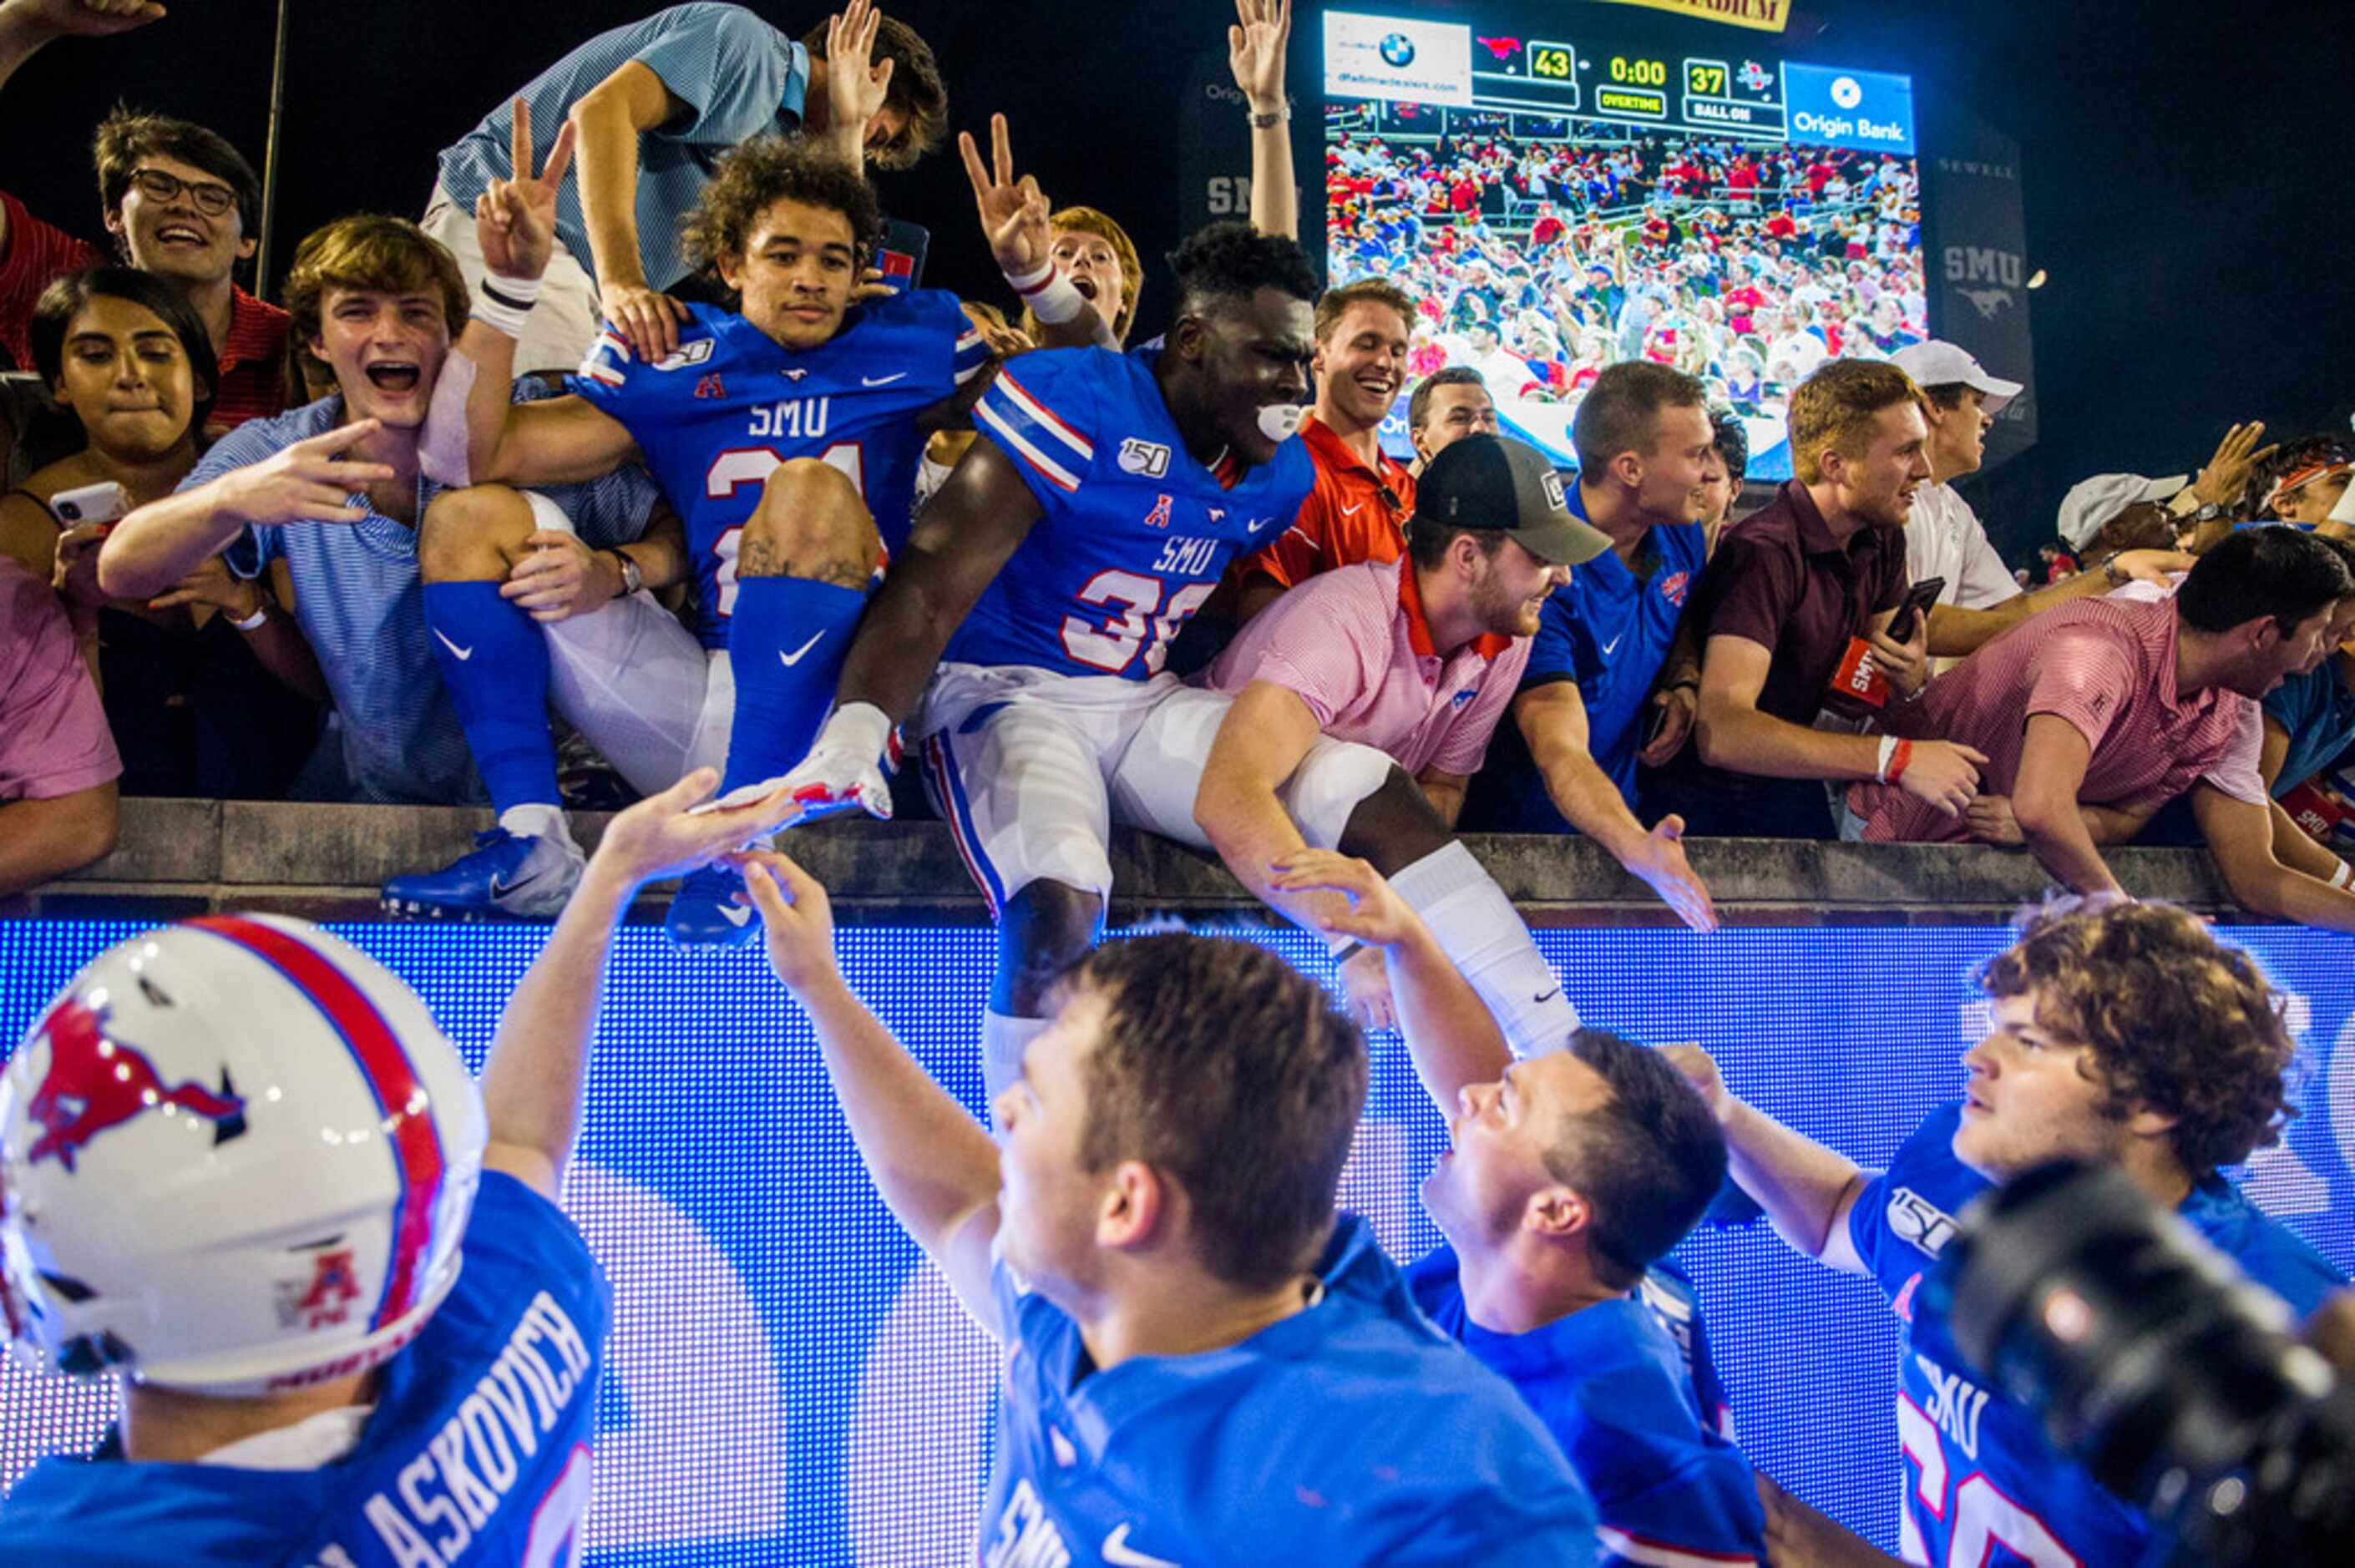 SMU players and fans celebrate a 43-37 win against Tulsa in triple overtime on Saturday,...